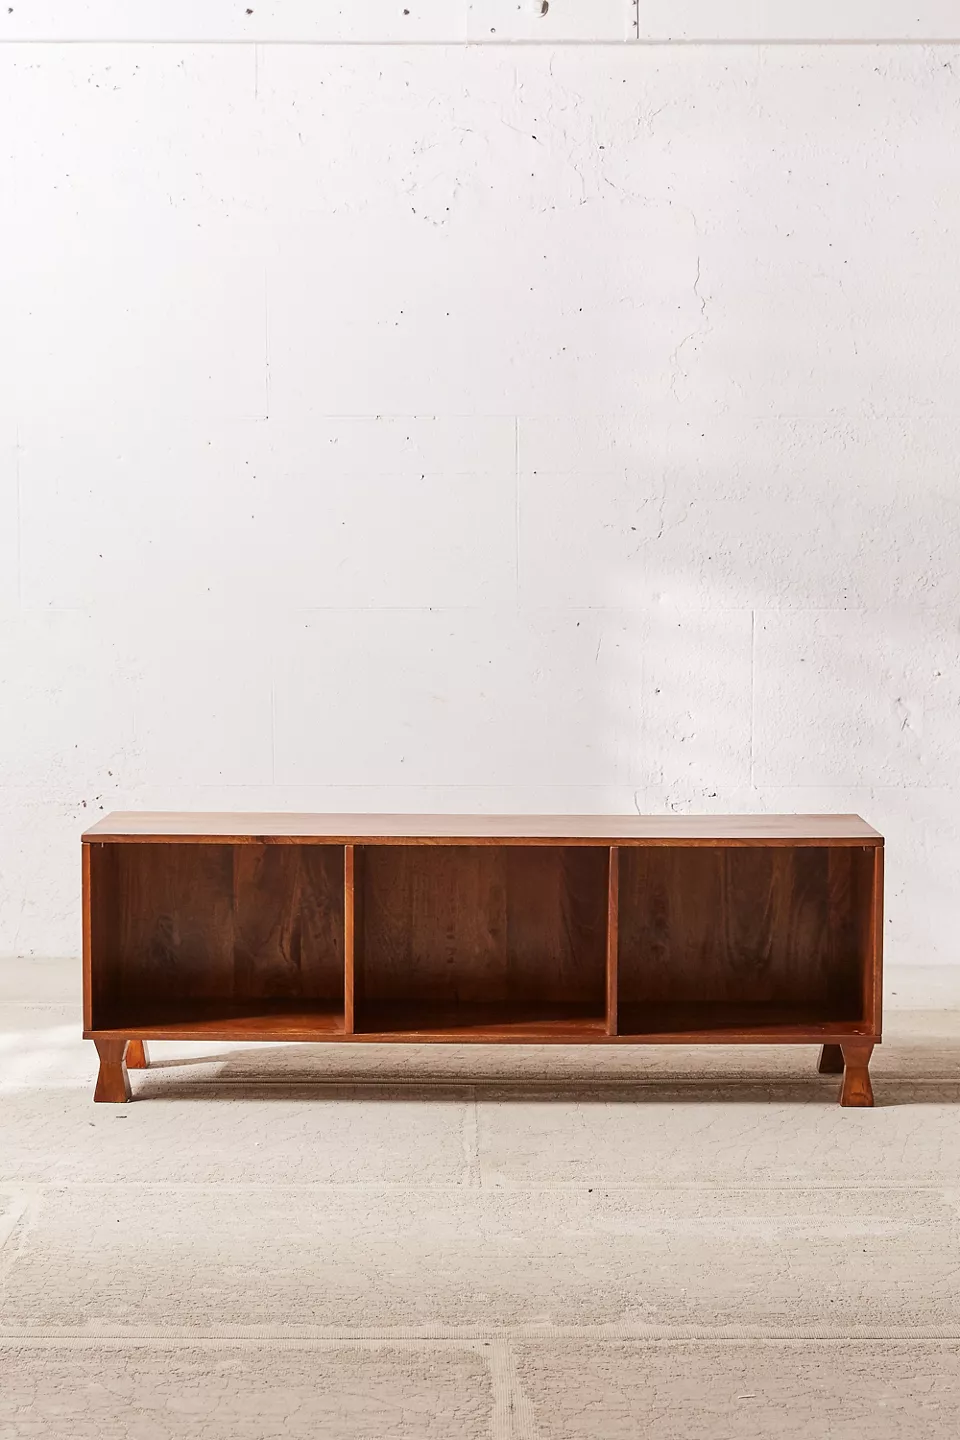 Shop Ema Low Credenza from Urban Outfitters on Openhaus